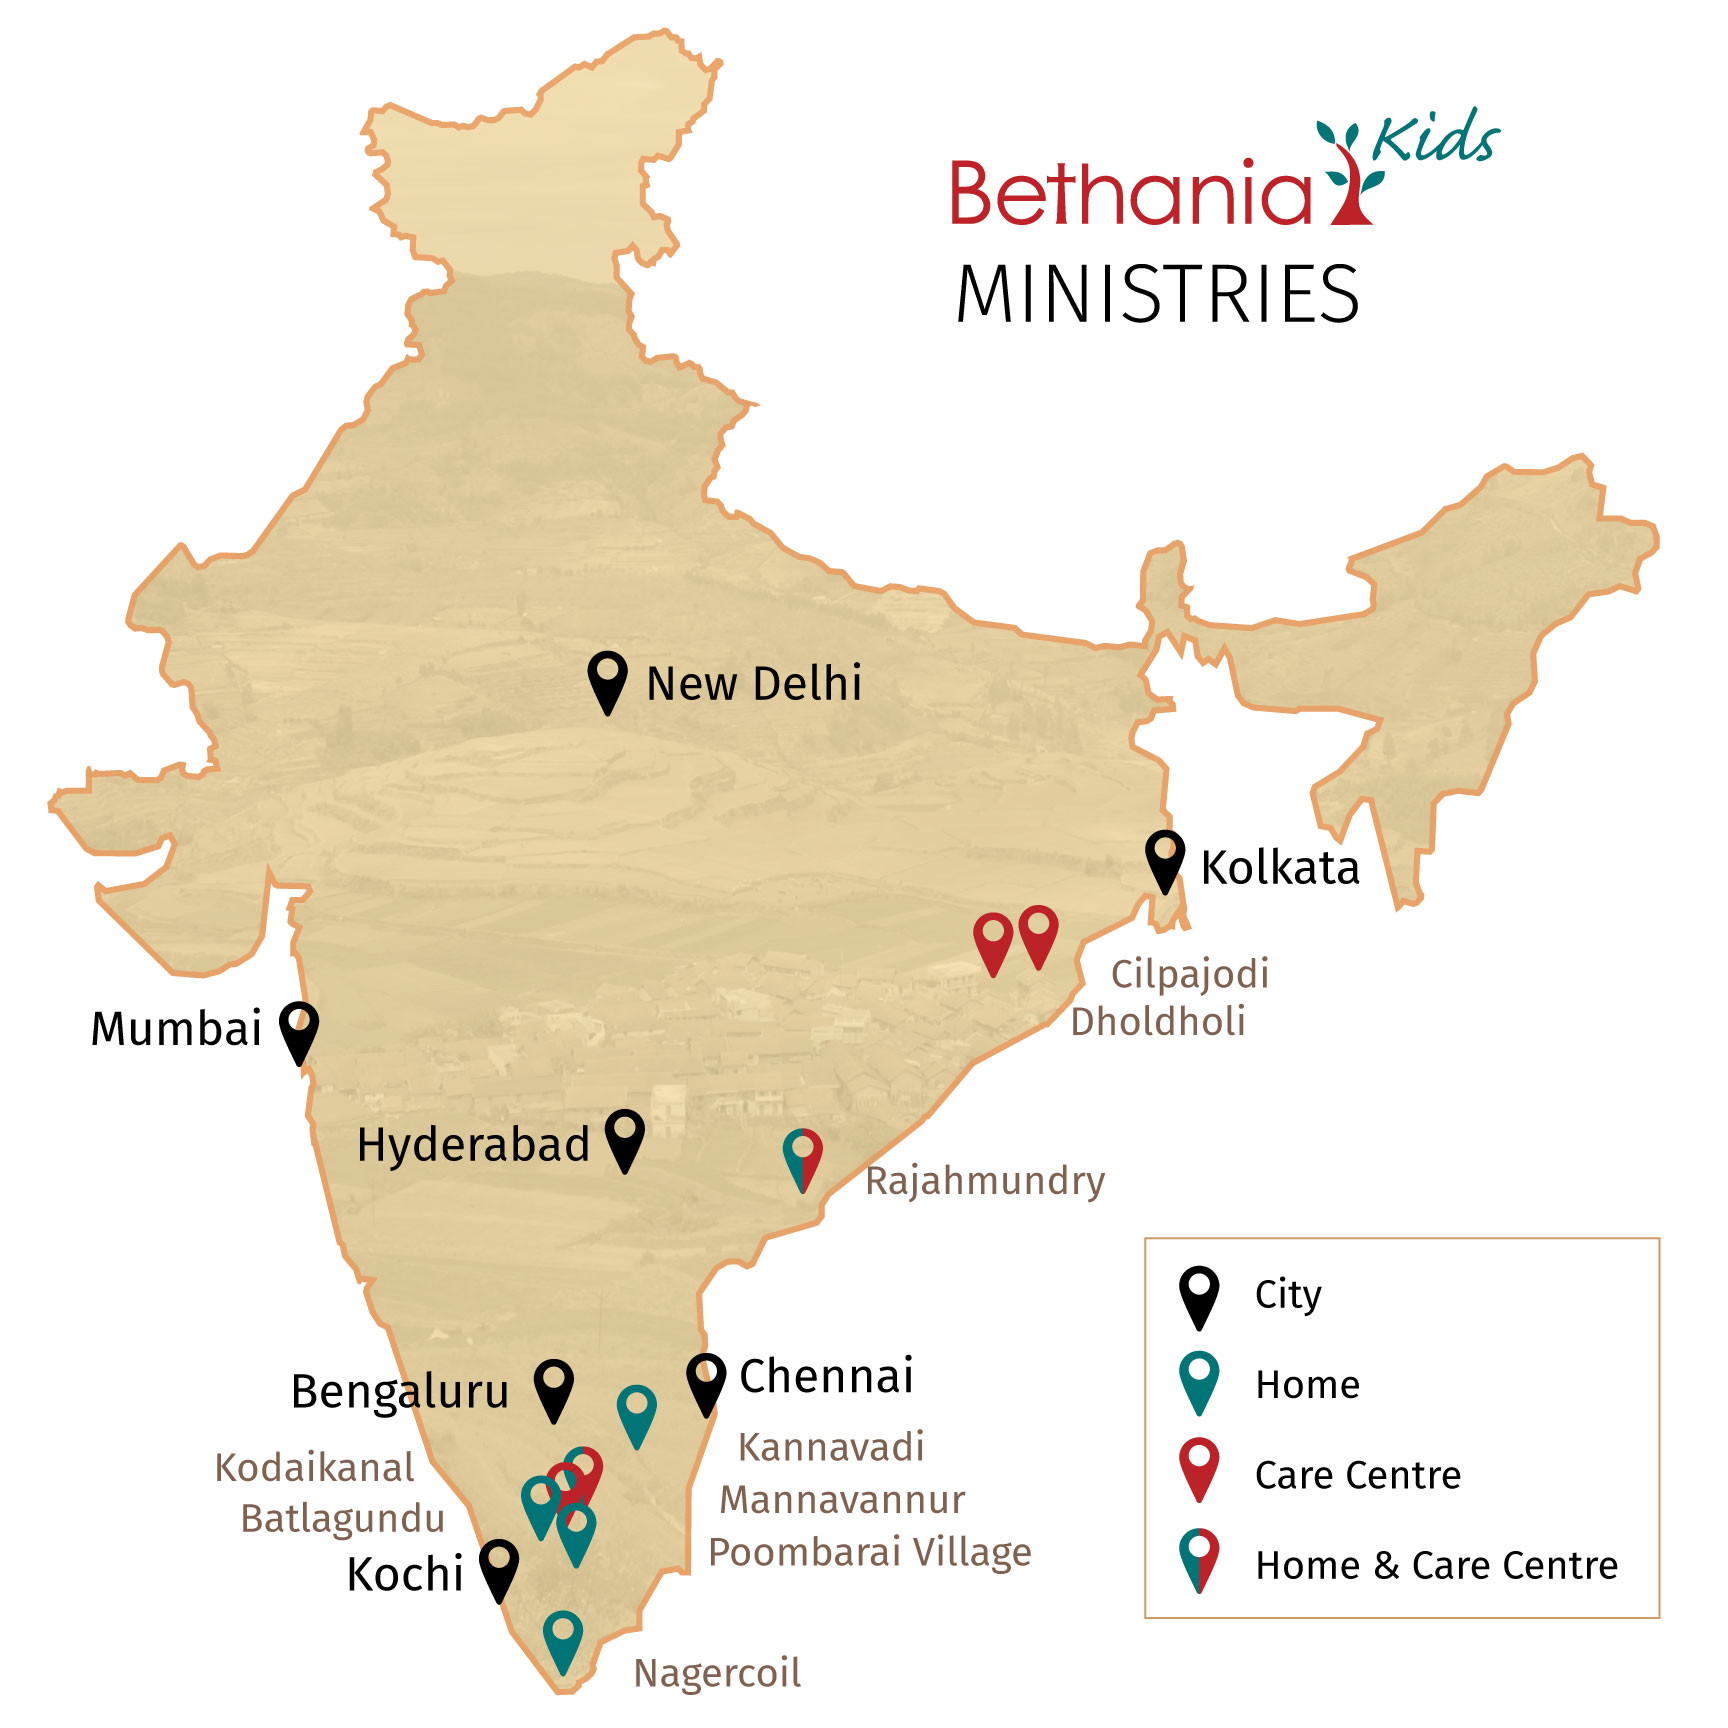 Map of Bethania Kids Ministries in India